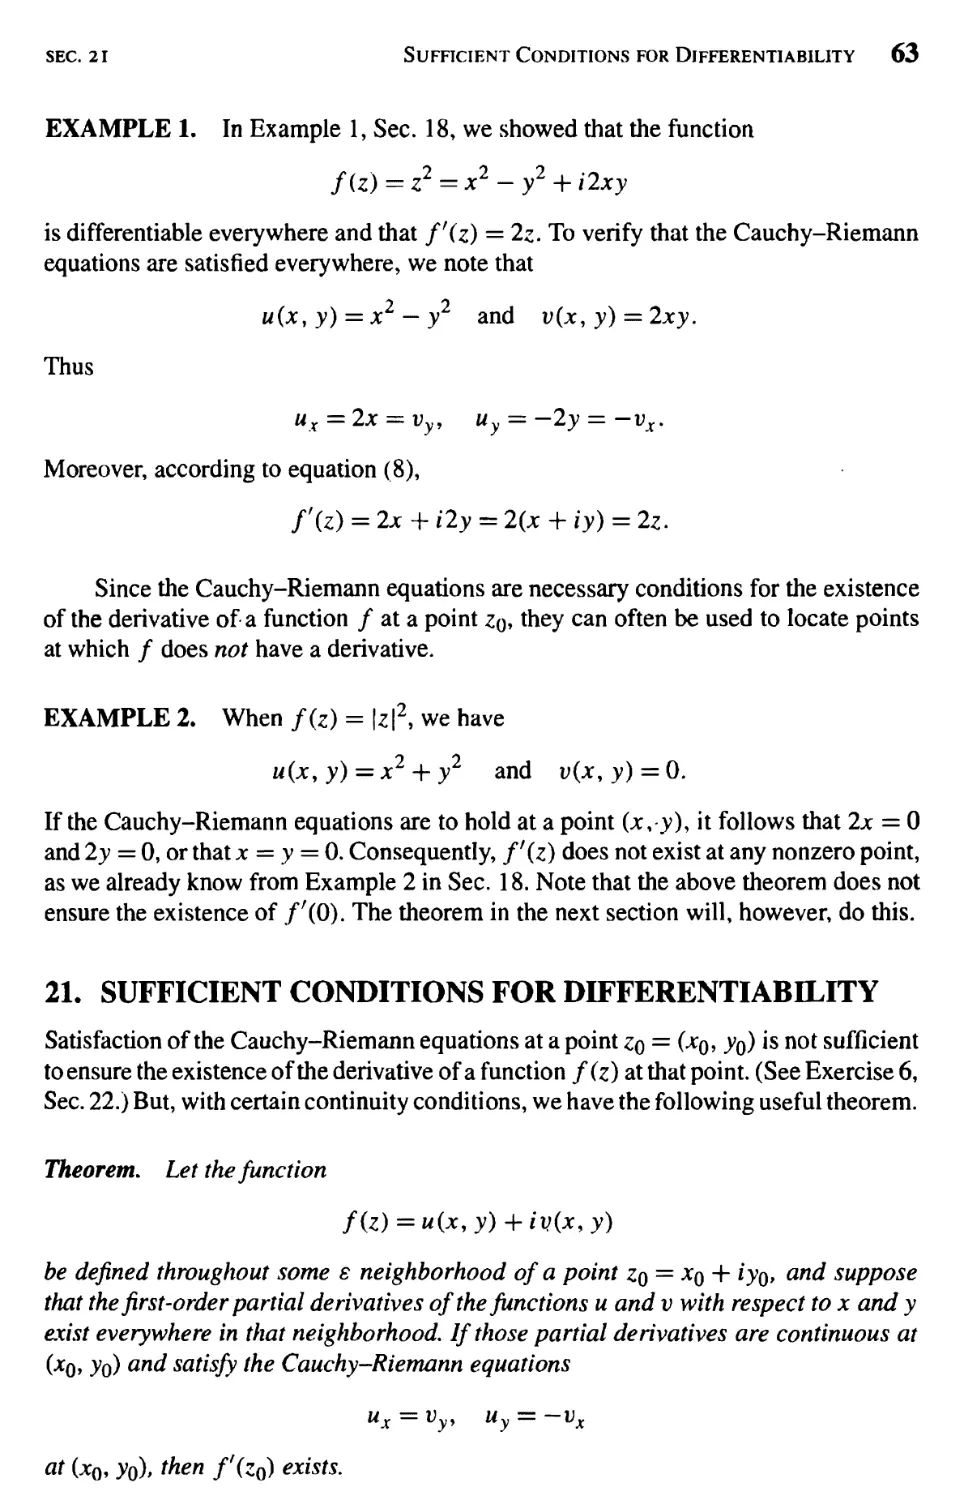 Sufficient Conditions for Differentiability